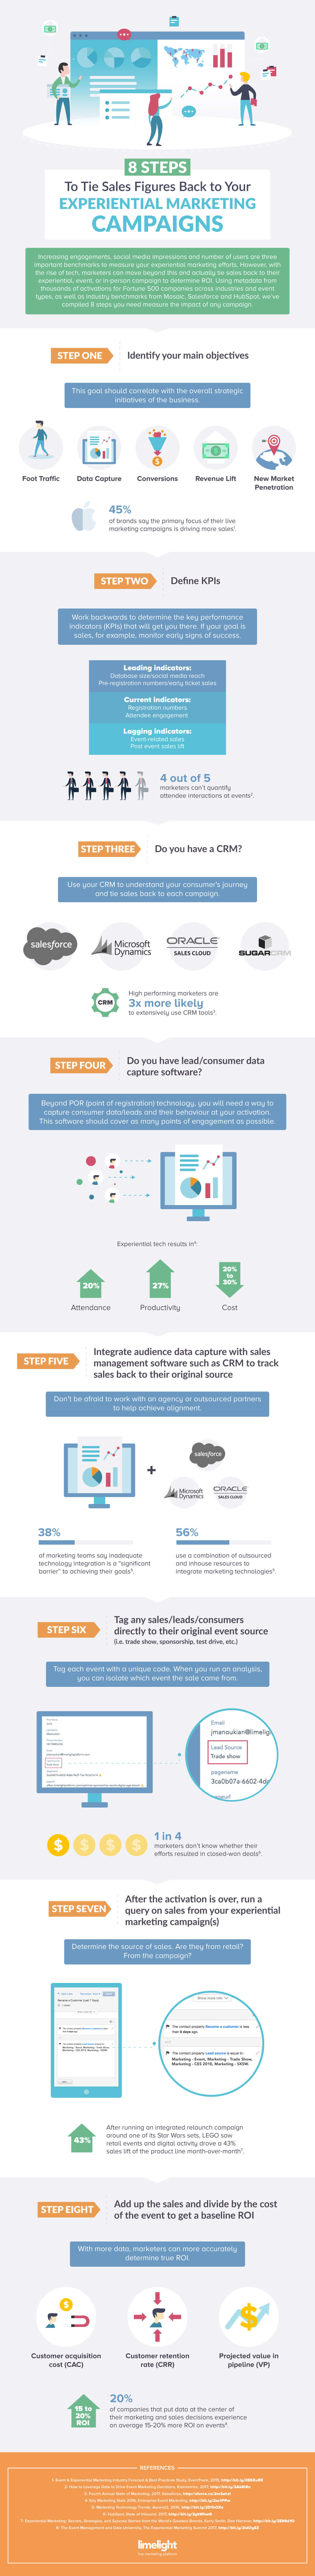 Sales-Figures-Experiential-Marketing-Campaigns-Infographic